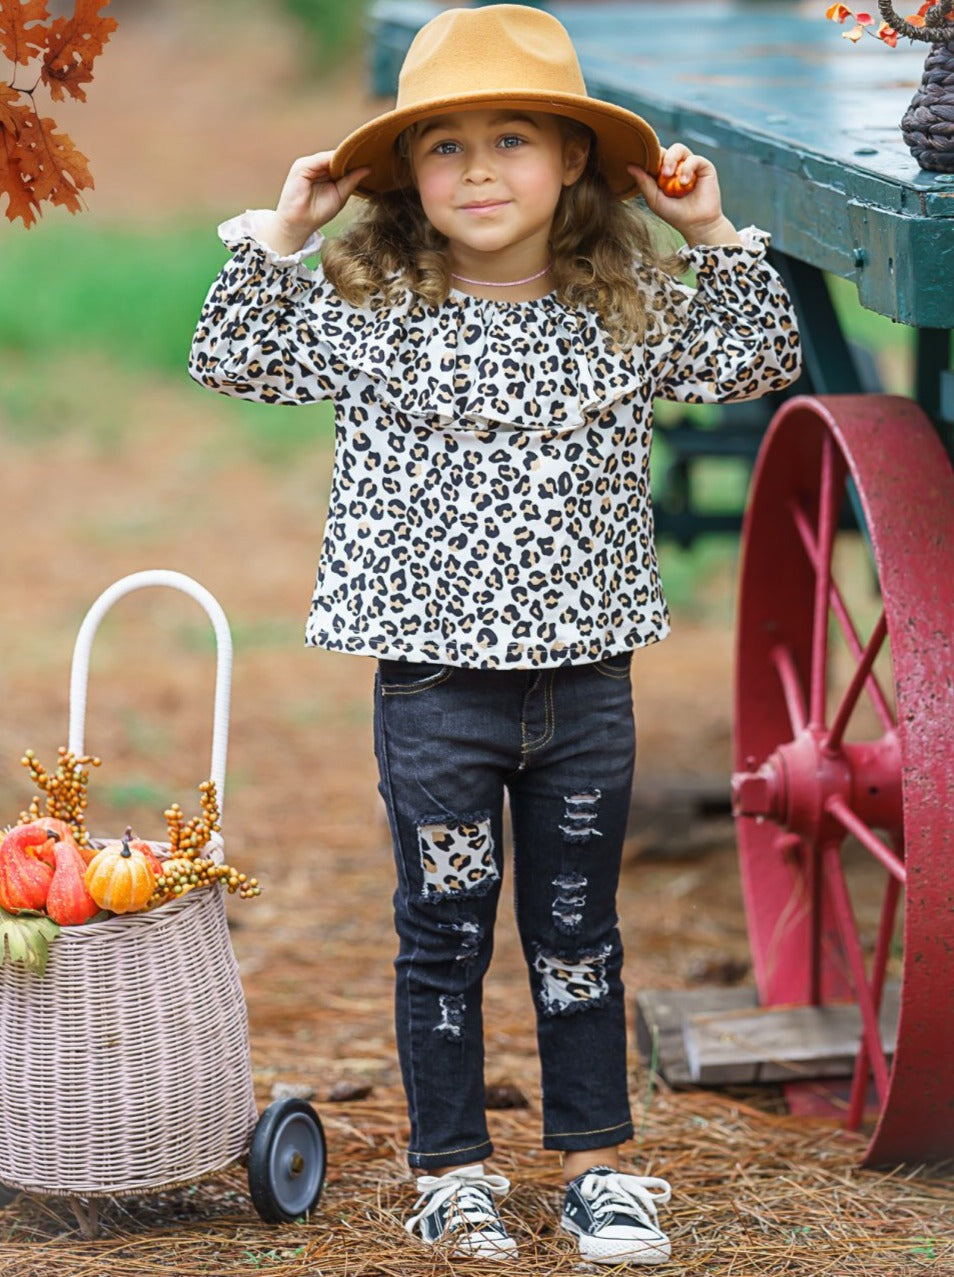 Girls set features a double ruffle neckline bib, animal printed top and patched jeans